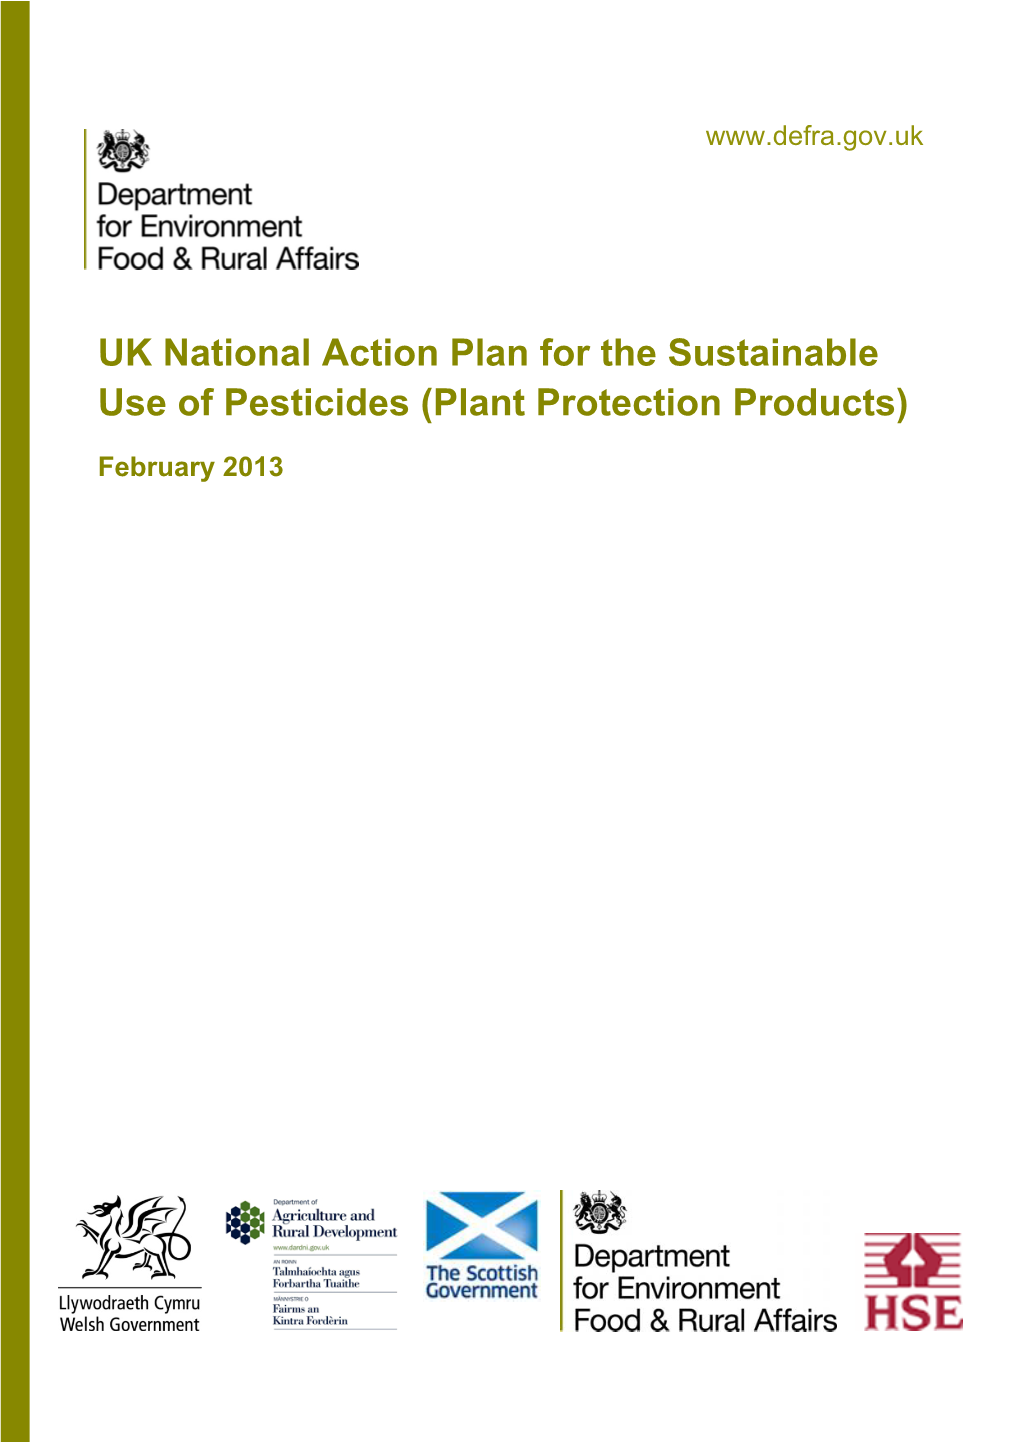 UK National Action Plan for the Sustainable Use of Pesticides (Plant Protection Products)